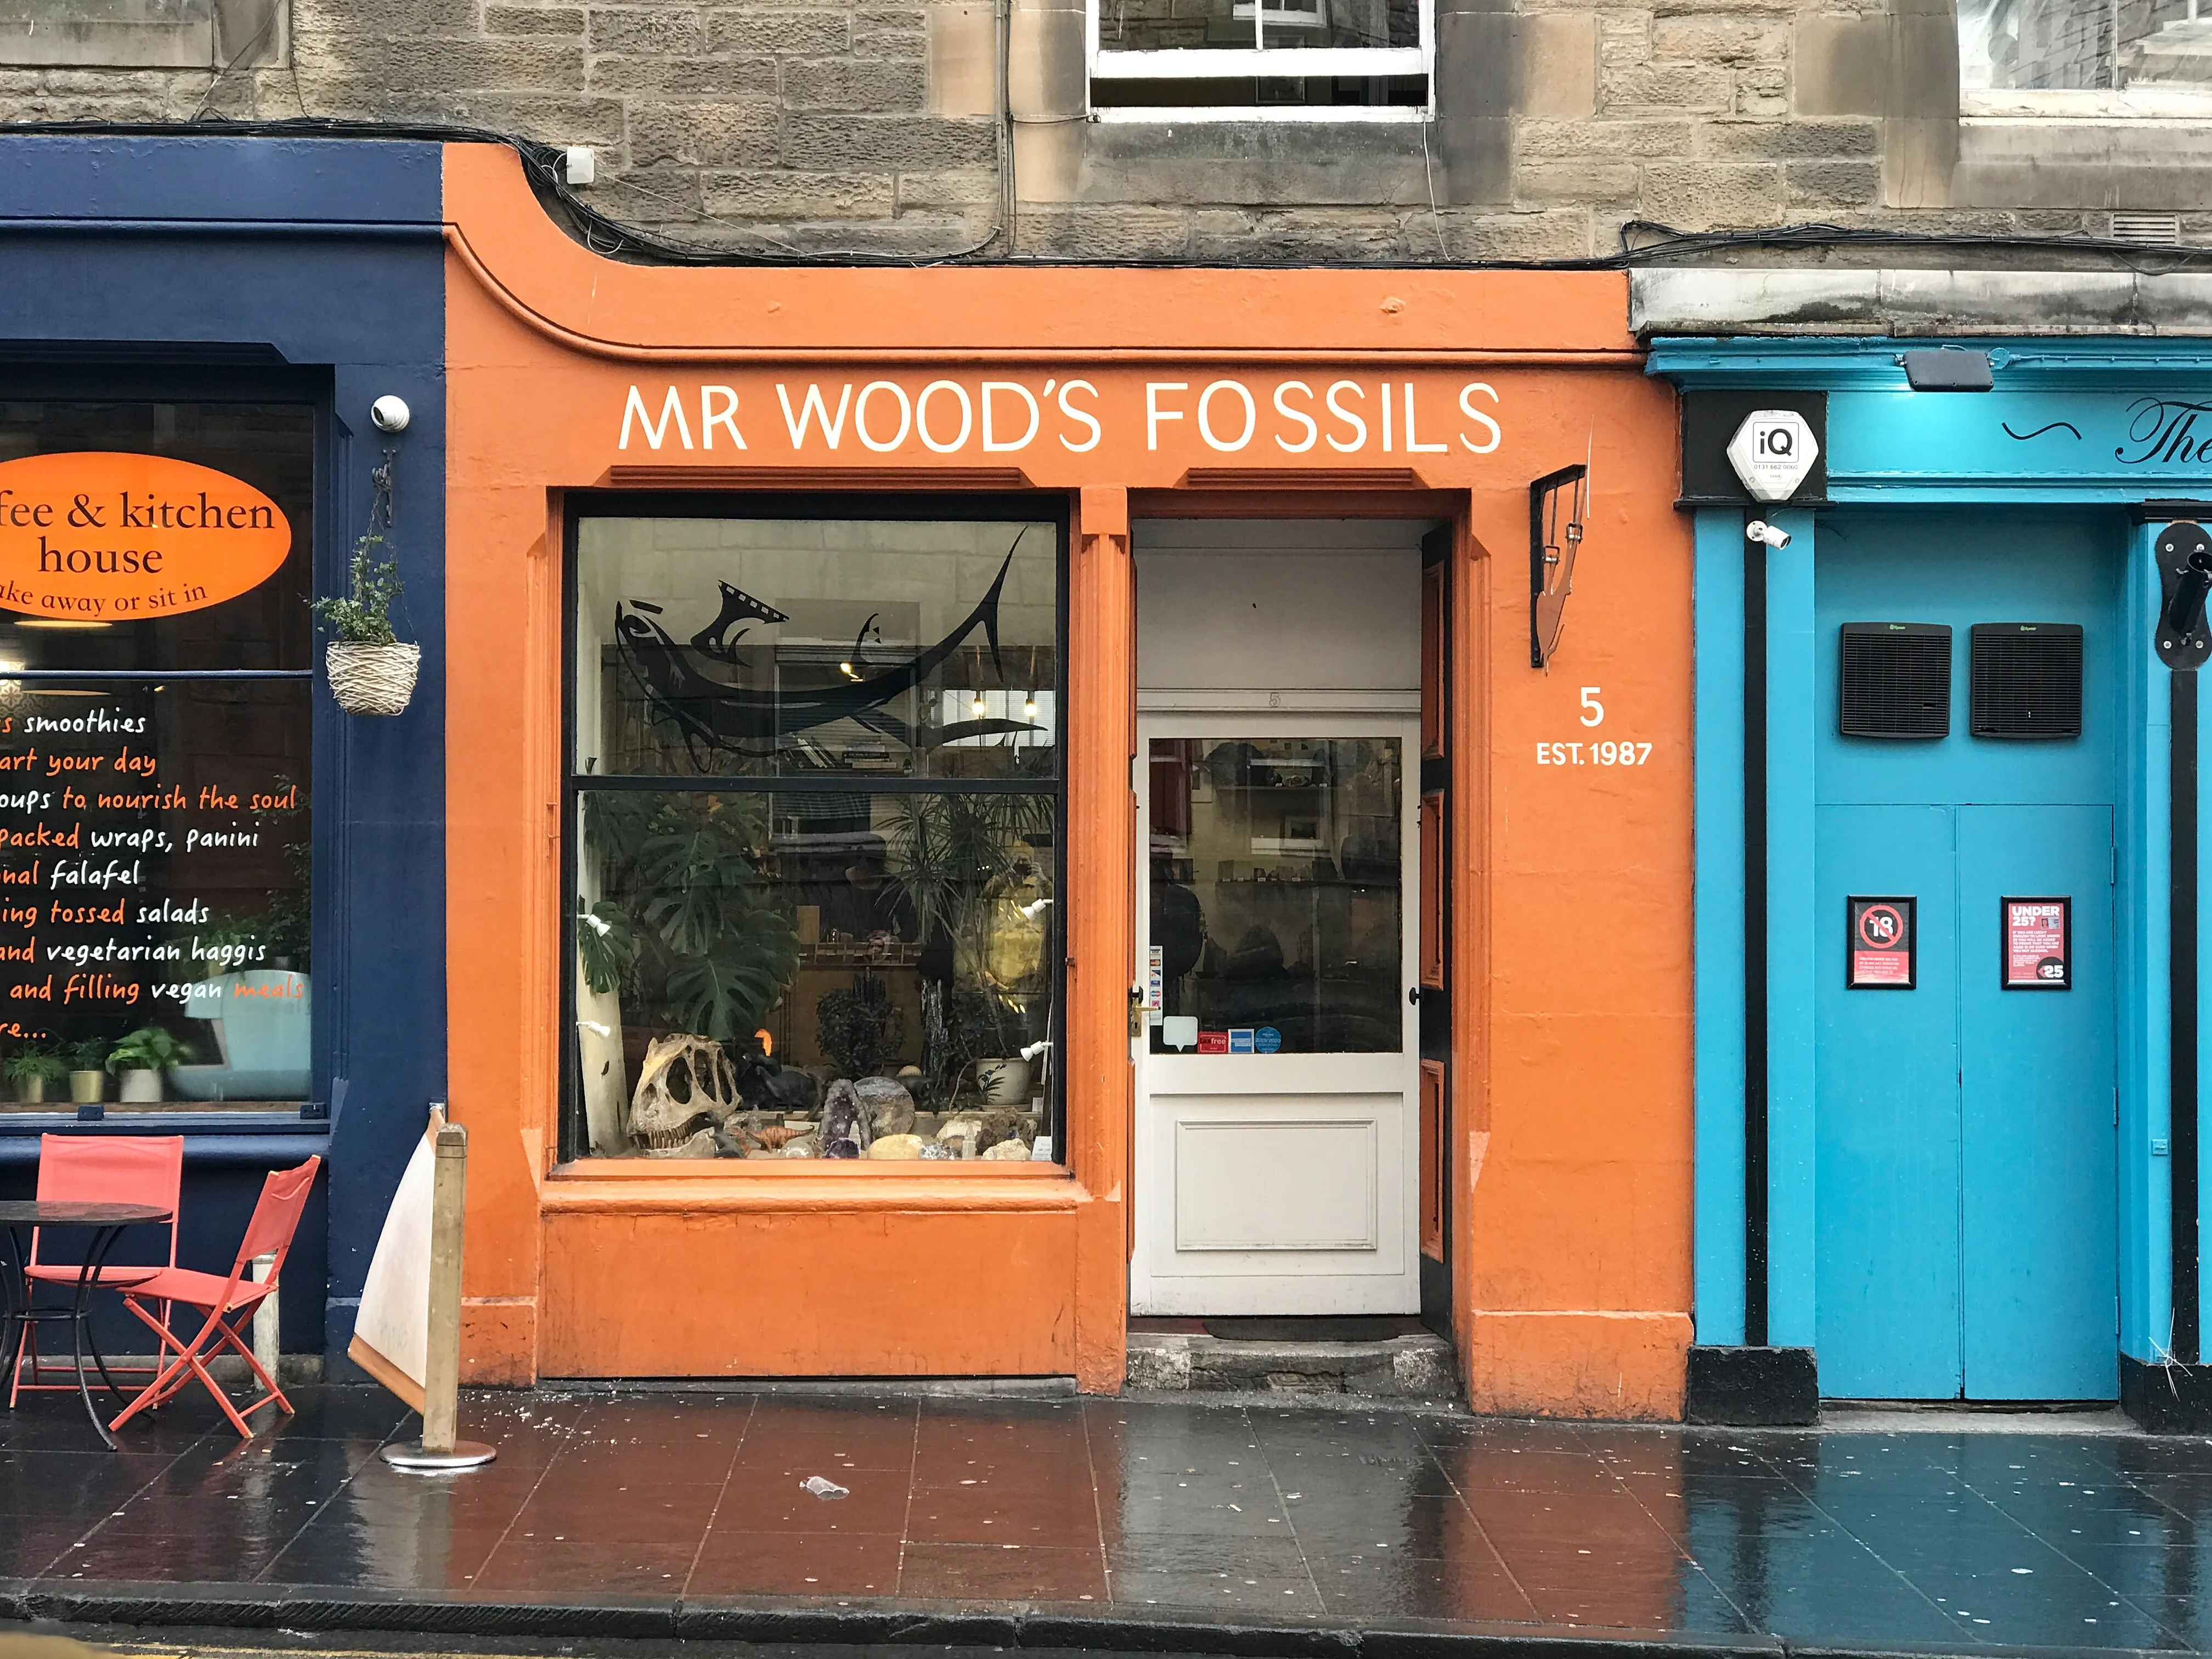 Mr Wood's Fossils in United Kingdom, europe | Other Crafts - Country Helper